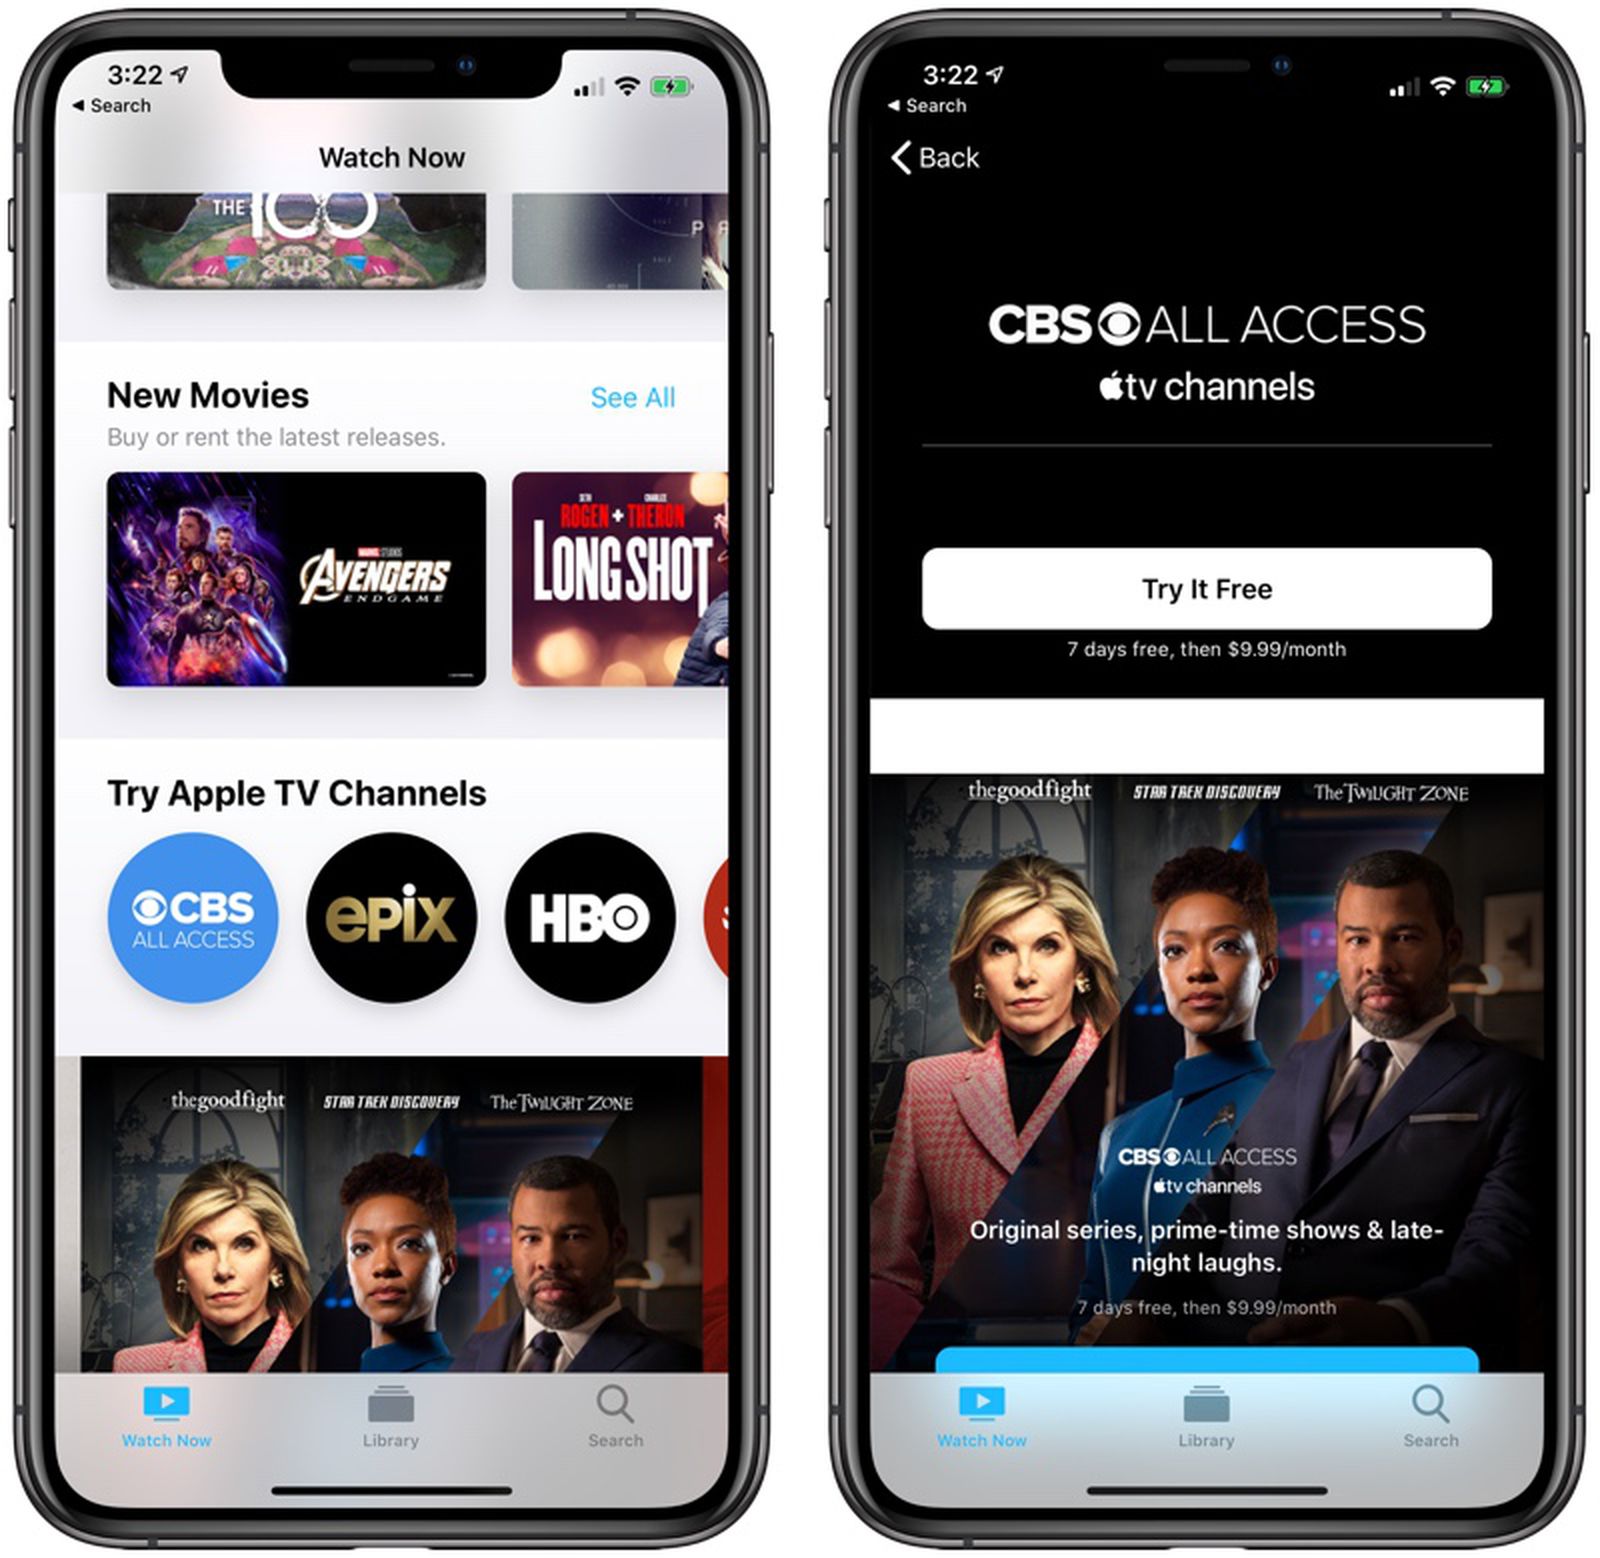 Apple TV Channels Now Offers All Access Service - MacRumors